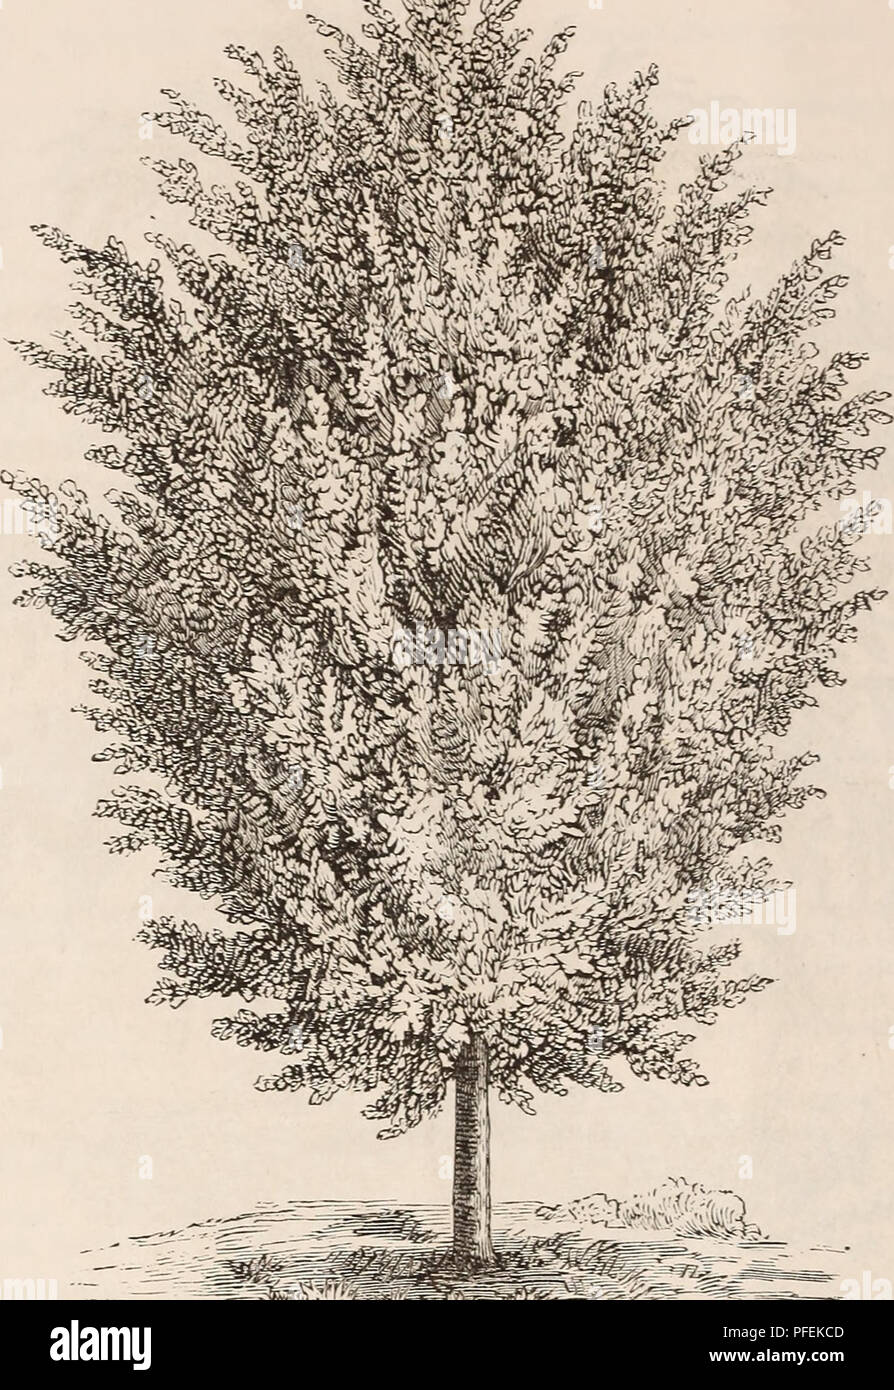 . Descriptive catalogue of ornamental trees, shrubs, roses, flowering plants, &amp;c. Ornamental trees Catalogs; Shrubs Catalogs; Roses Catalogs; Flowers Catalogs. 36 ELLWAXGER &amp; BARRY'S CATALOGUE.. '^^^^i^^^^mim^^^^^ TILIA EUROP^A VAR. ALBA. (white-leaved linden.) T. Europsea. European Linden. A very fine pyramidal tree, with large leaves and fragrant flowers. ^1.00. *var. alba, (argentea.) White-leaved European Linden. From Hun- gary. A vigorous growing tree, with cordate acuminate leaves, downy beneath, and smooth above. It is particularly noticeable among trees by its white appearance. Stock Photo